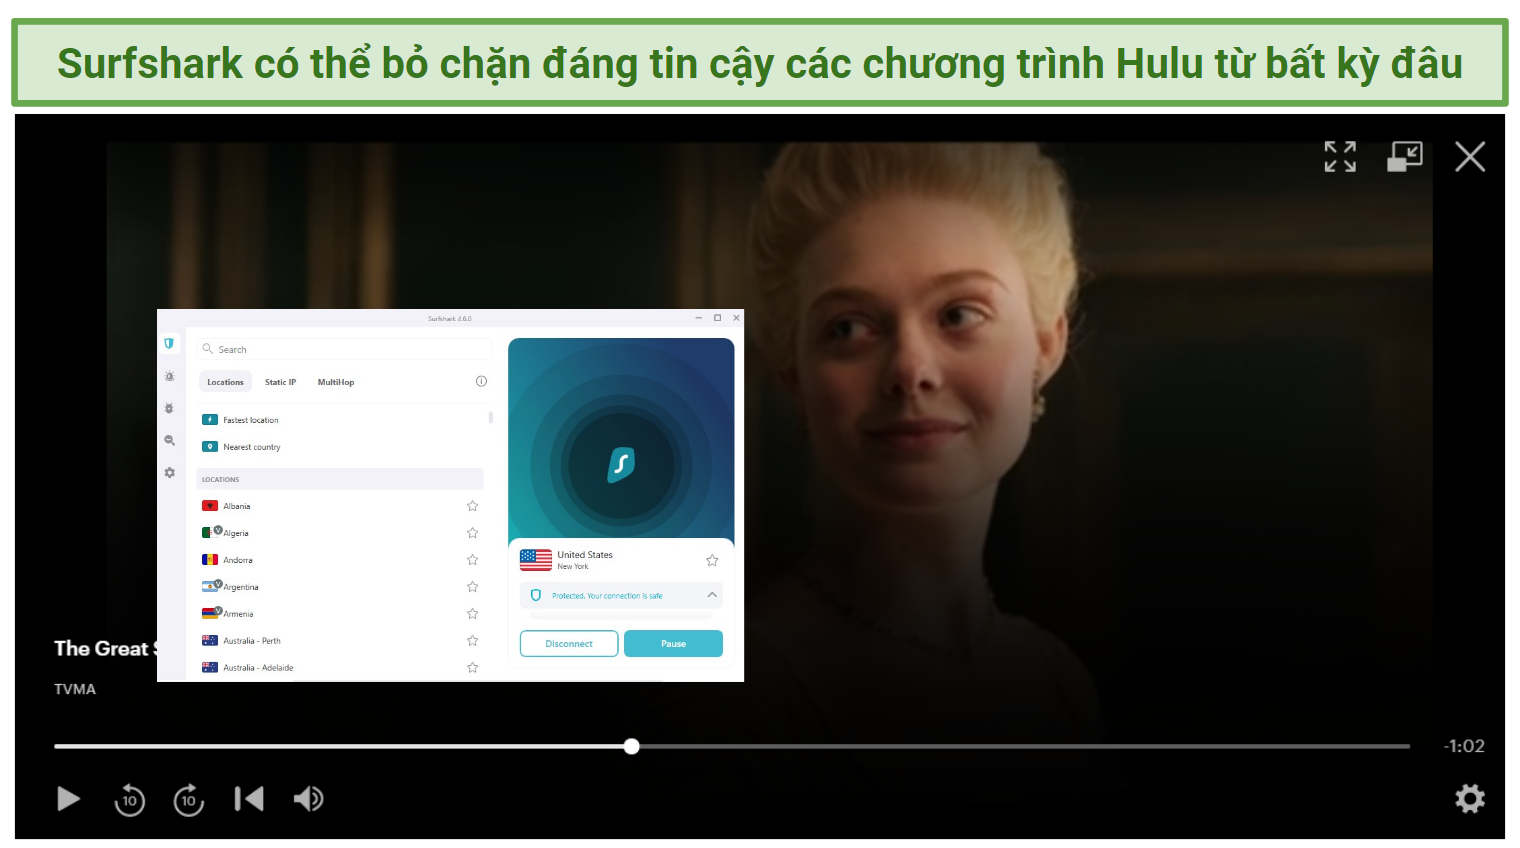 Image showing Hulu series streaming after connecting to Surfshark